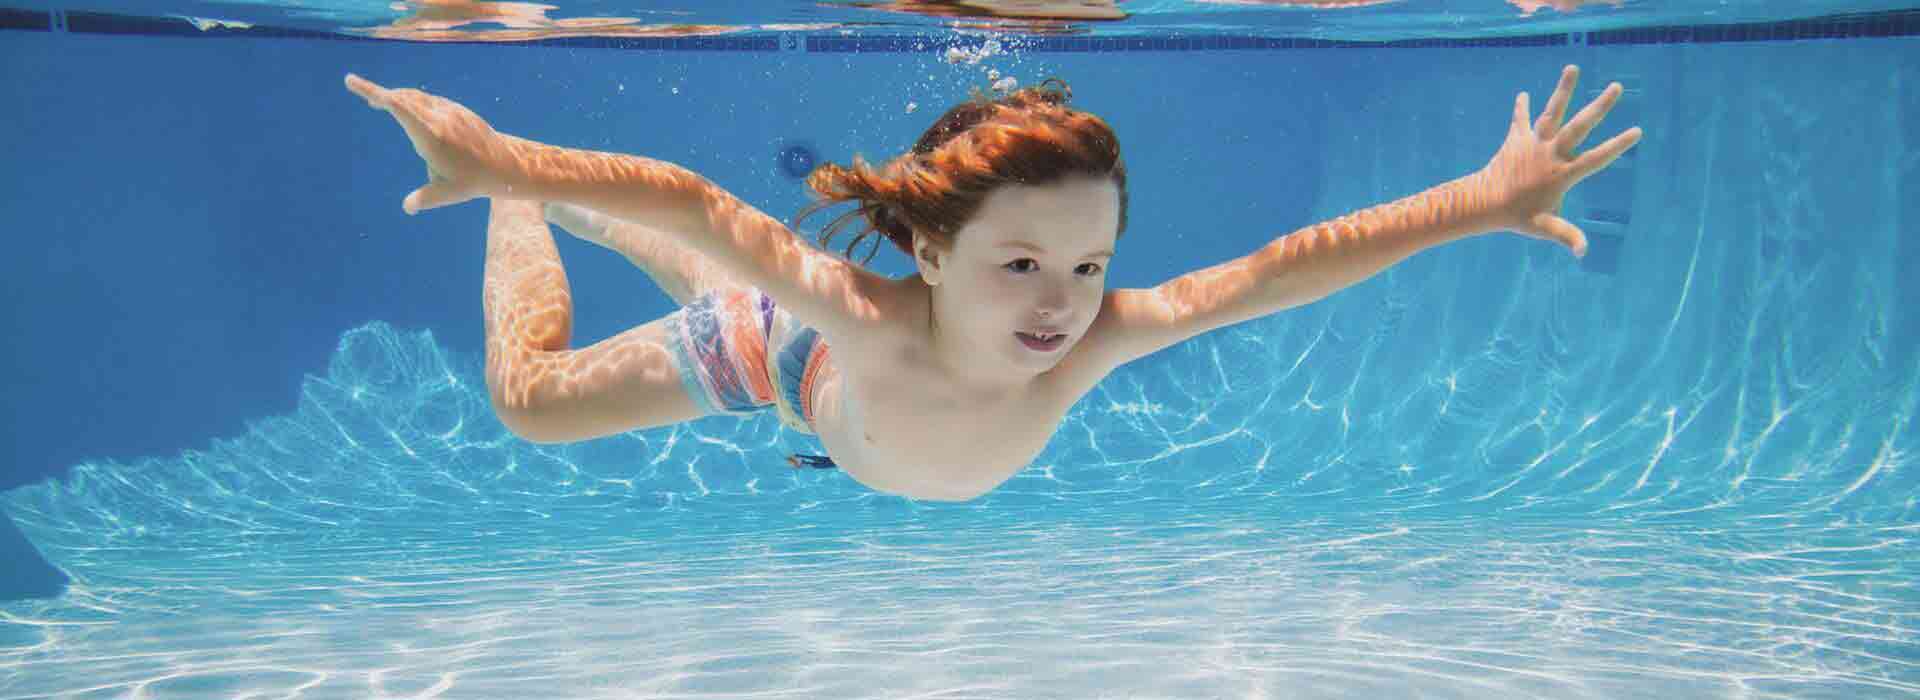 A child swimming in a pool